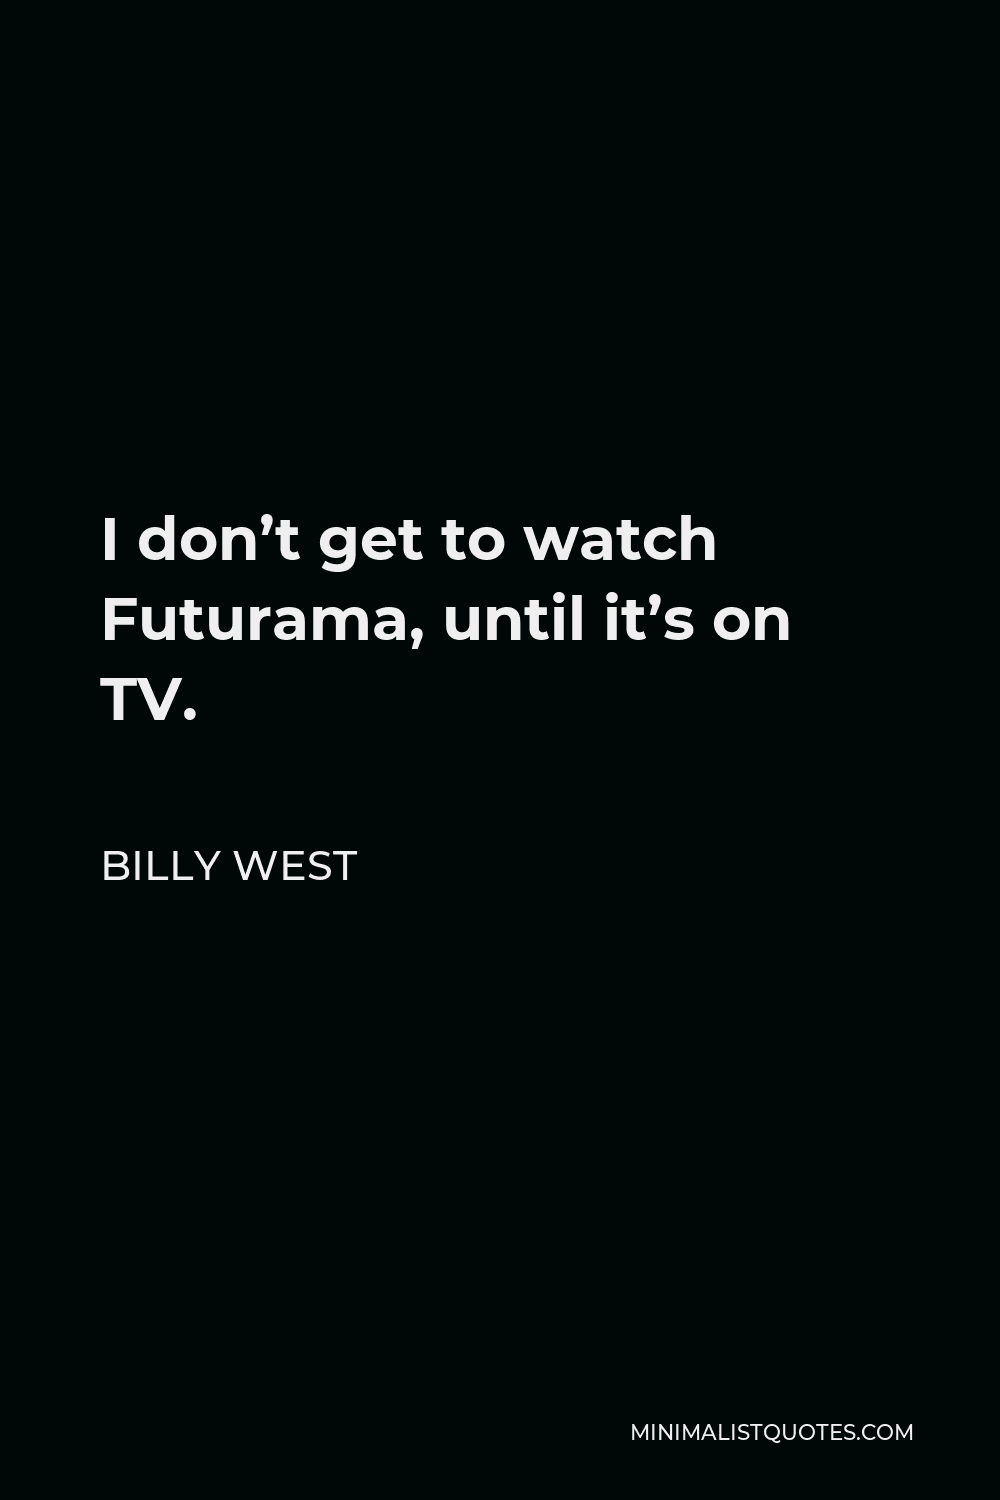 Billy West Quote - I don’t get to watch Futurama, until it’s on TV.